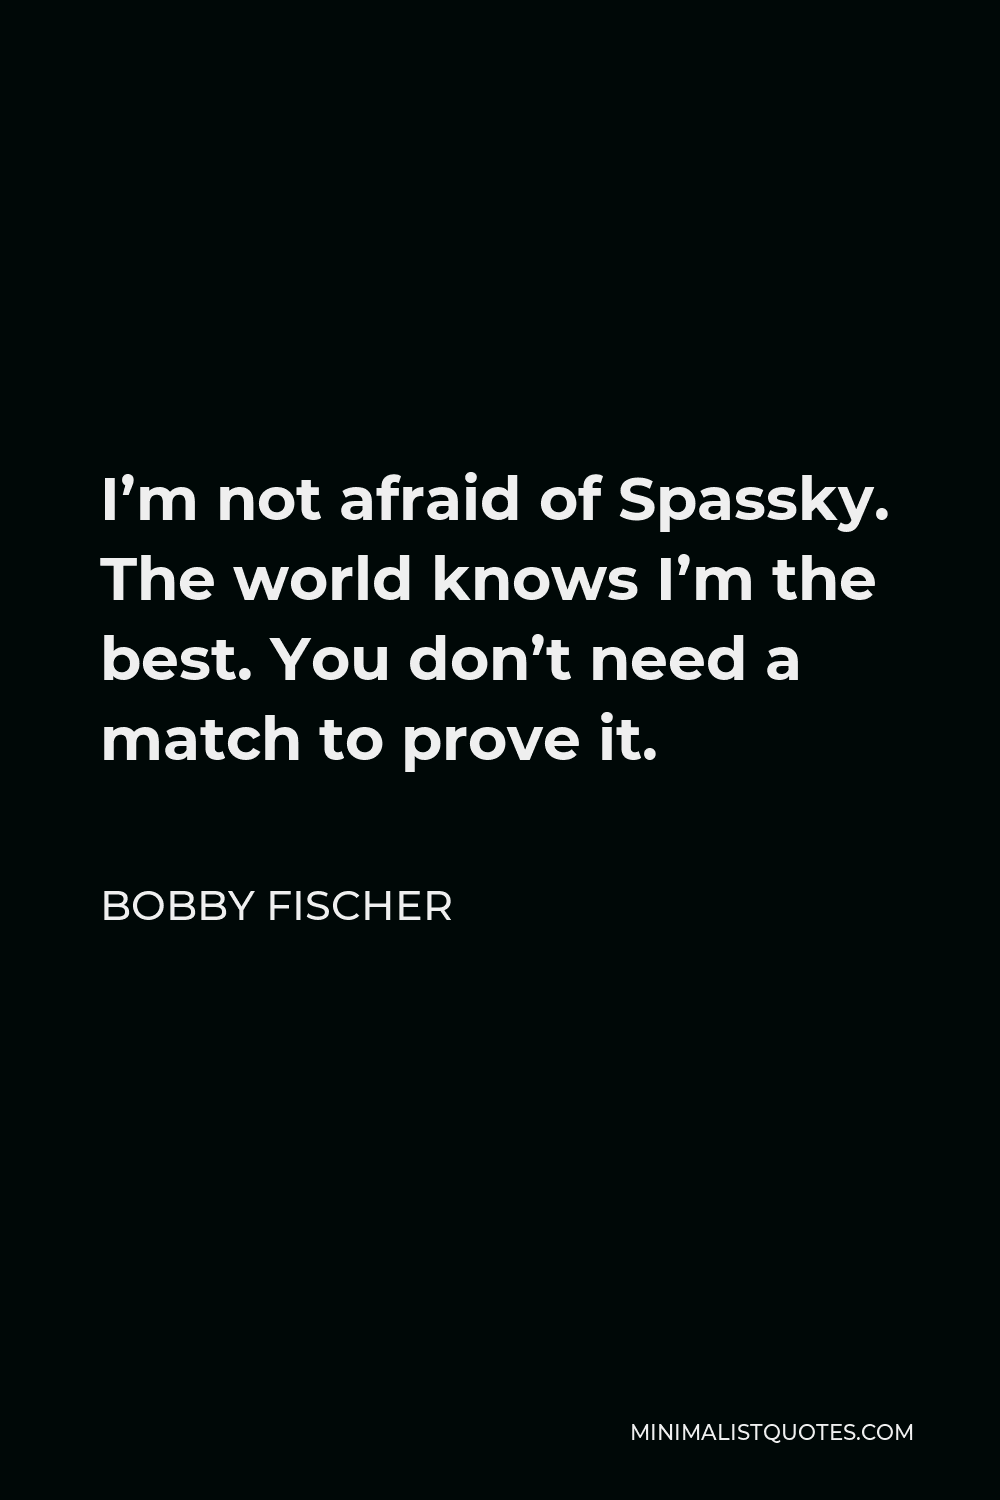 Bobby Fischer Quote - I’m not afraid of Spassky. The world knows I’m the best. You don’t need a match to prove it.